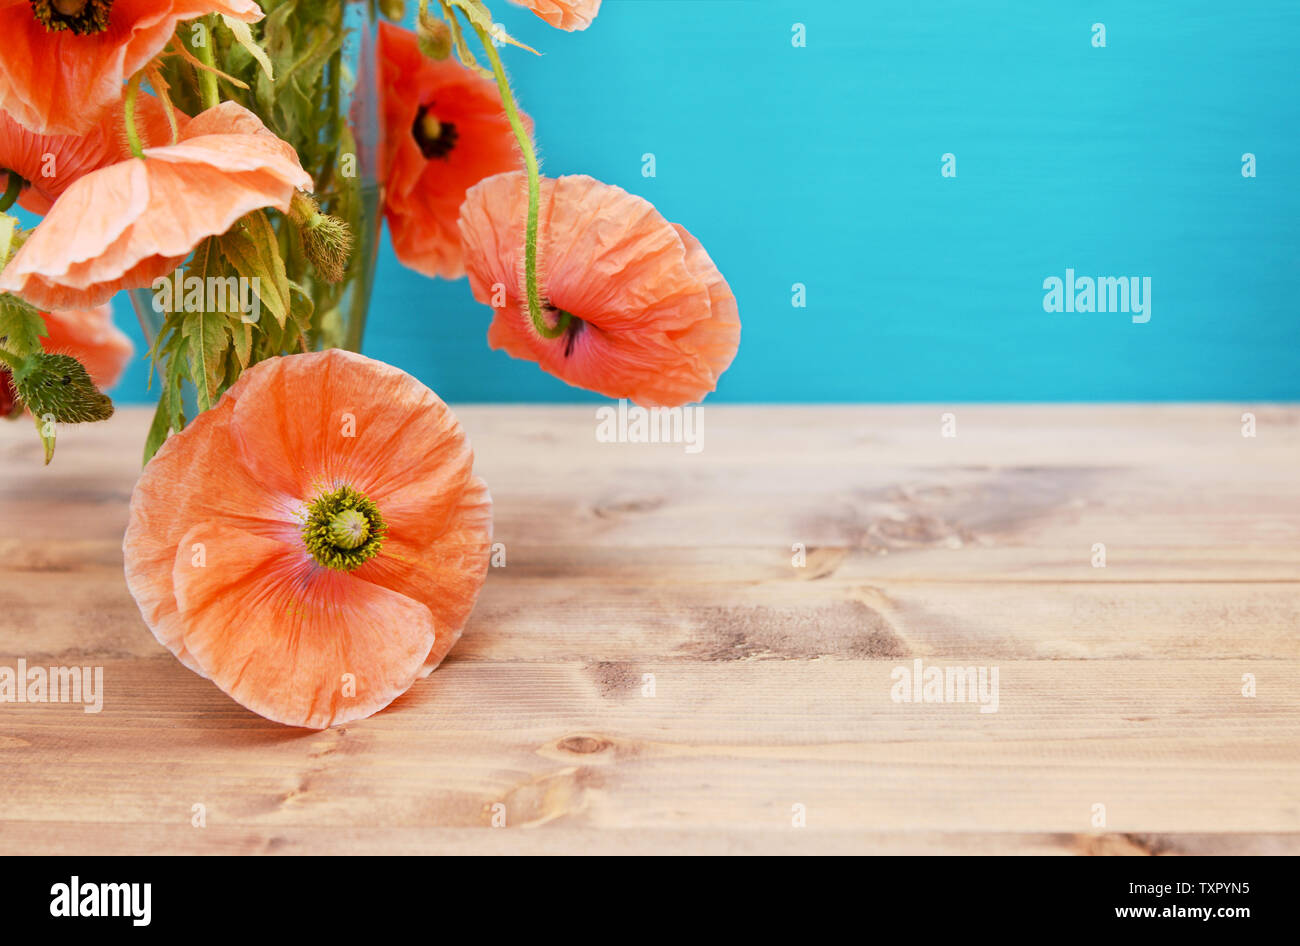 Detail of pink poppies with soft petals cascading from a glass vase on winding stems. Copy space on turquoise background and wooden table. Stock Photo